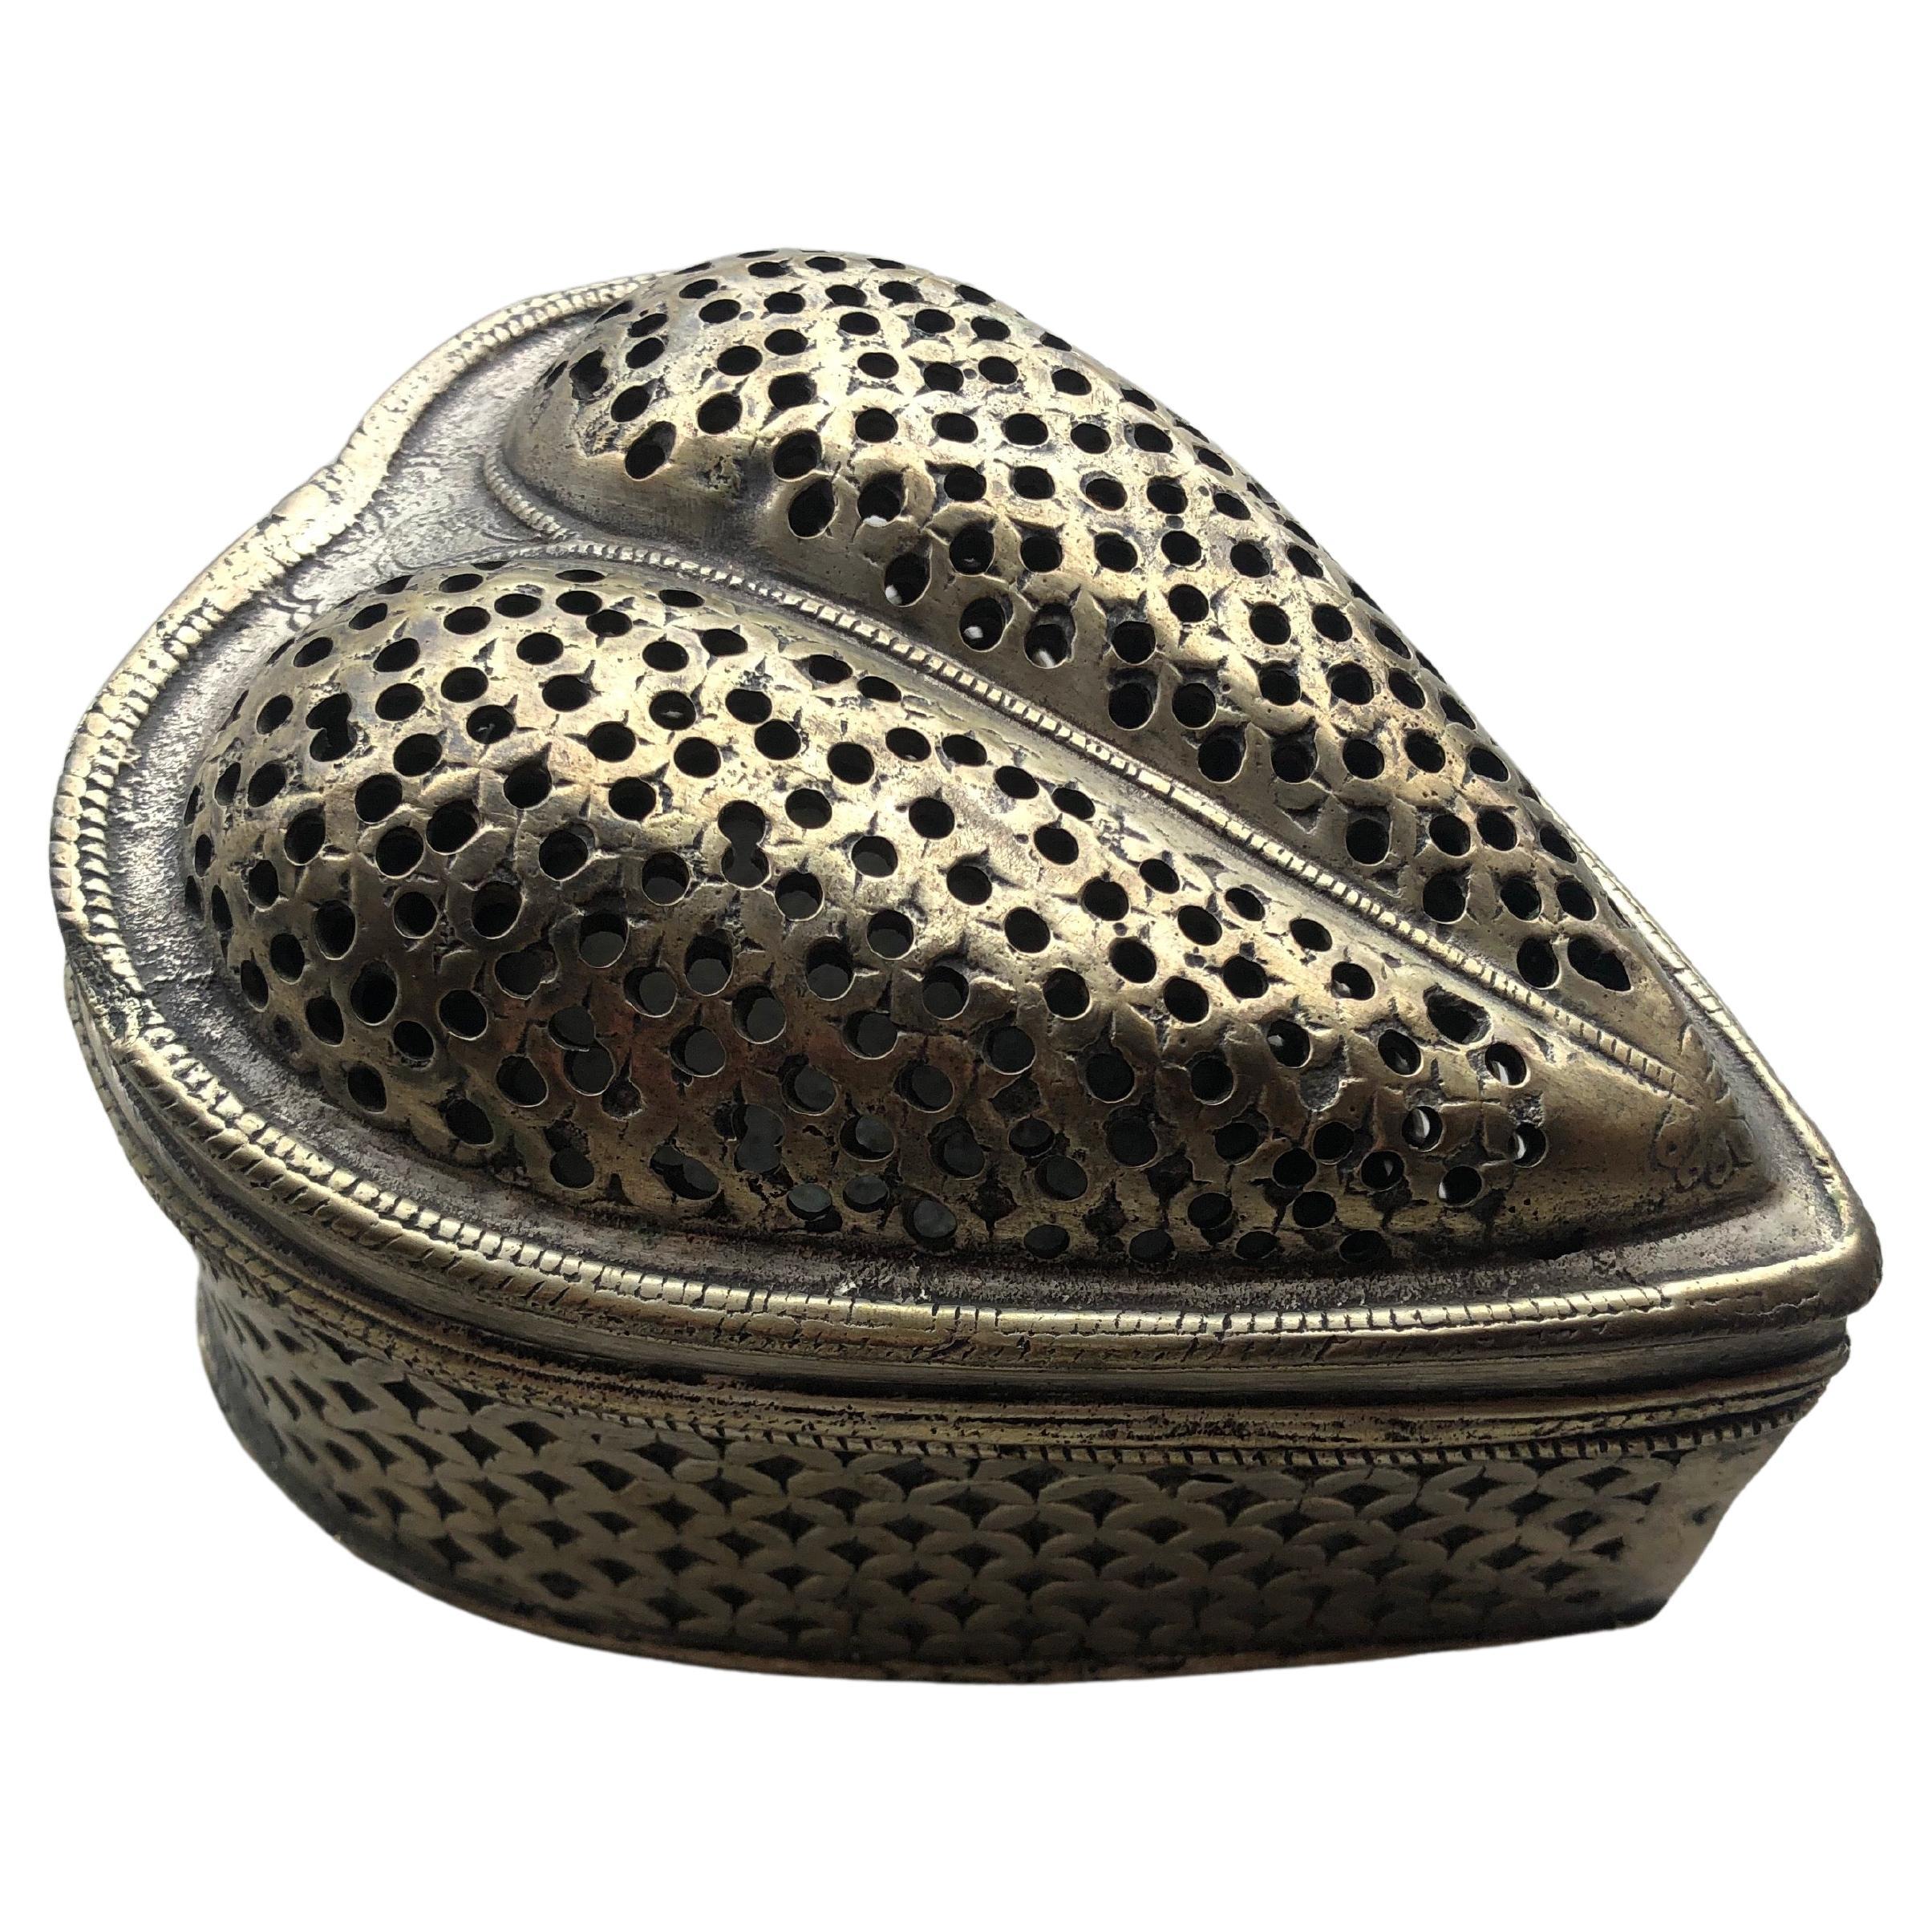 Antique Handmade Metal Heart Shaped Box For Sale